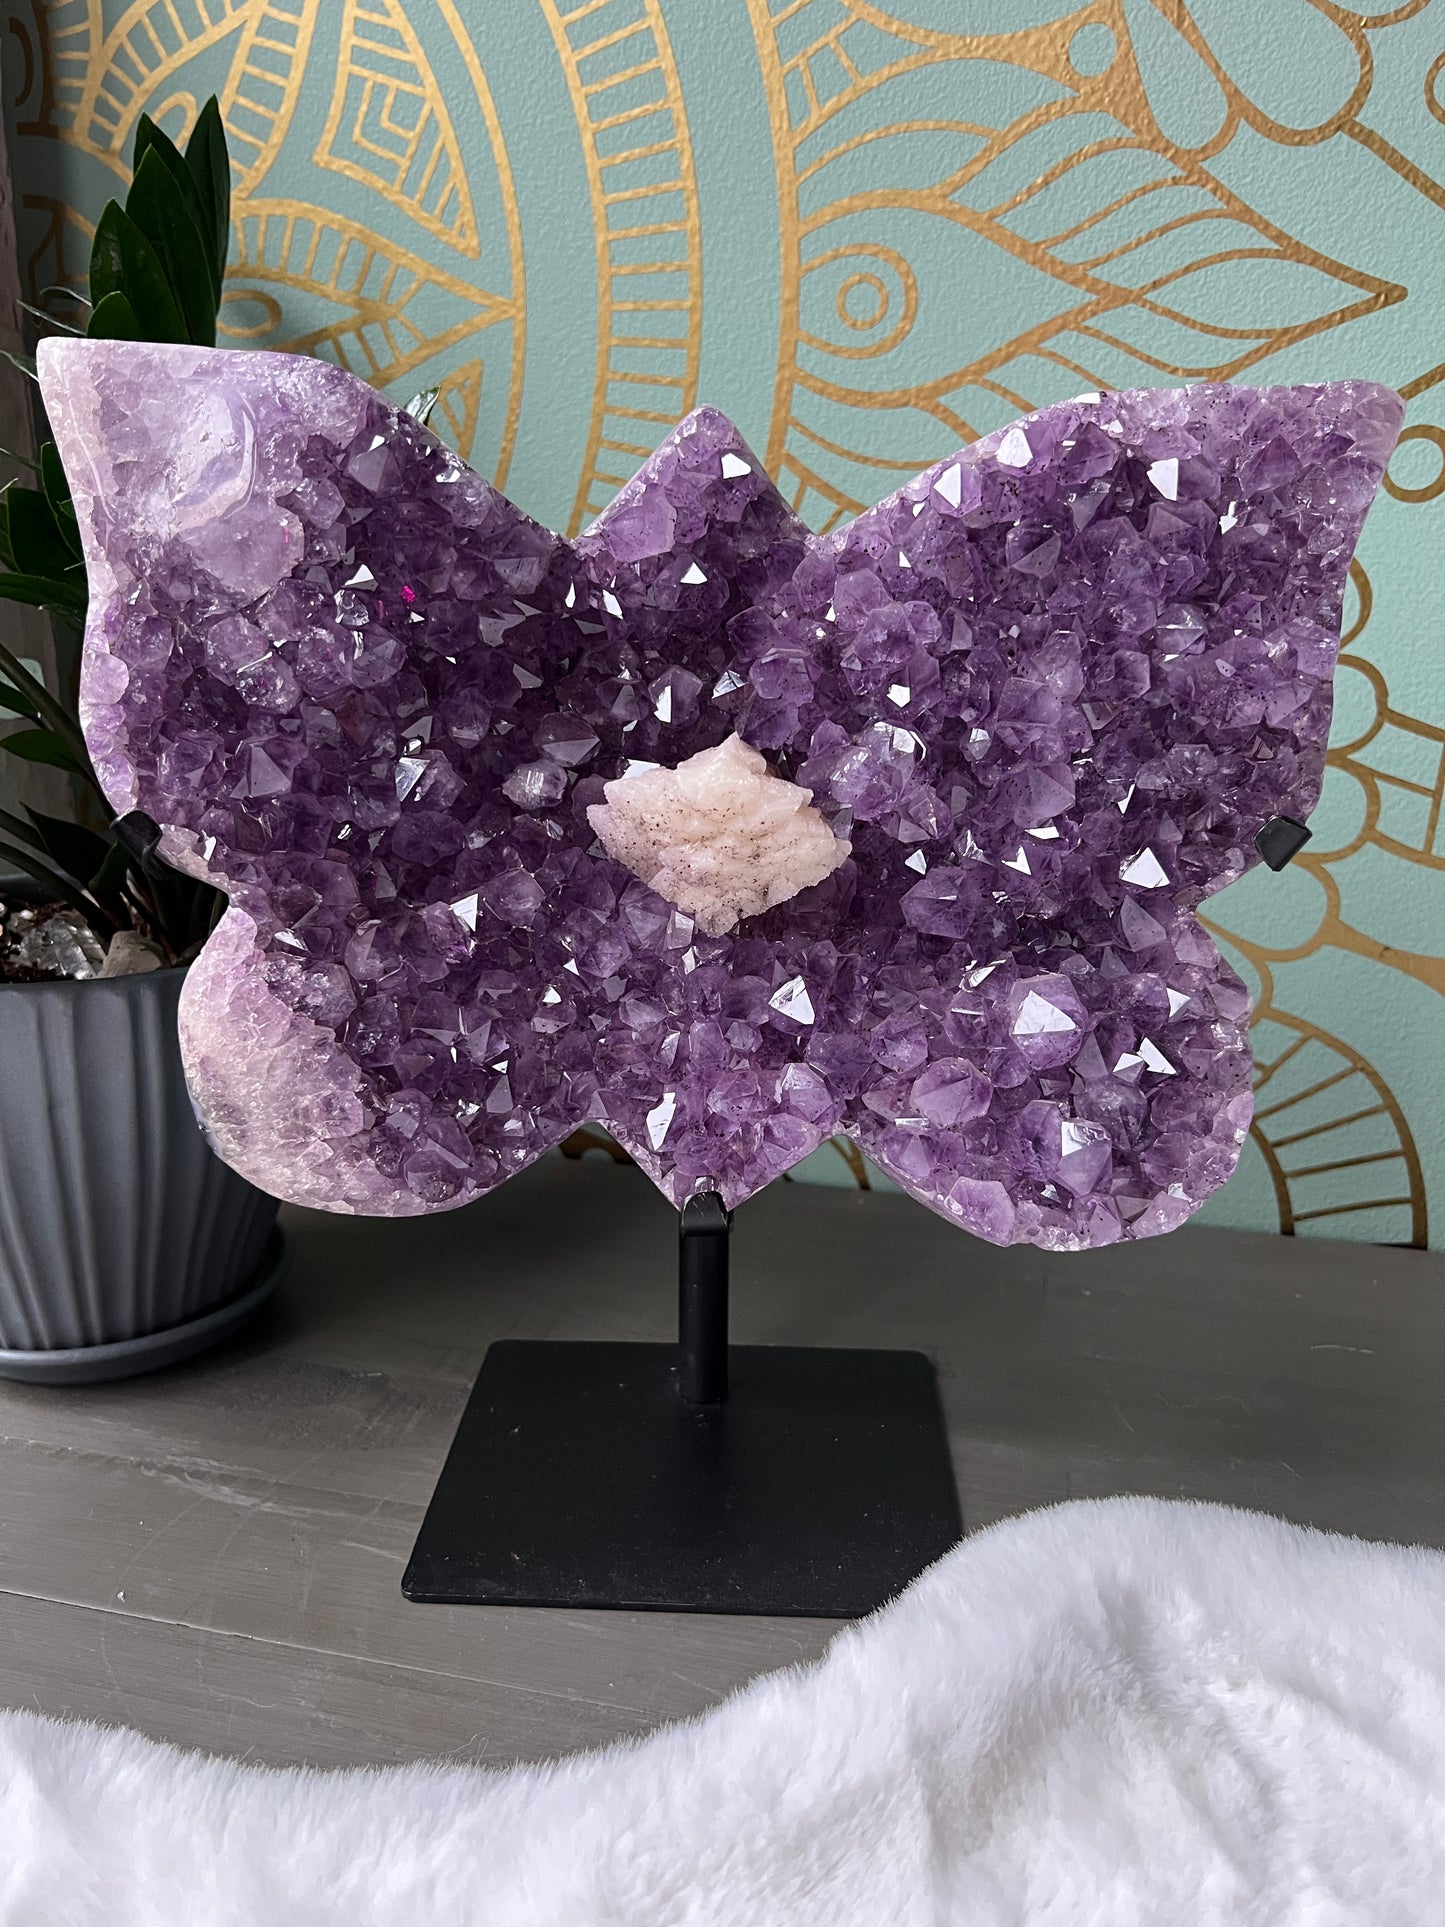 Amethyst with Calcite butterfly